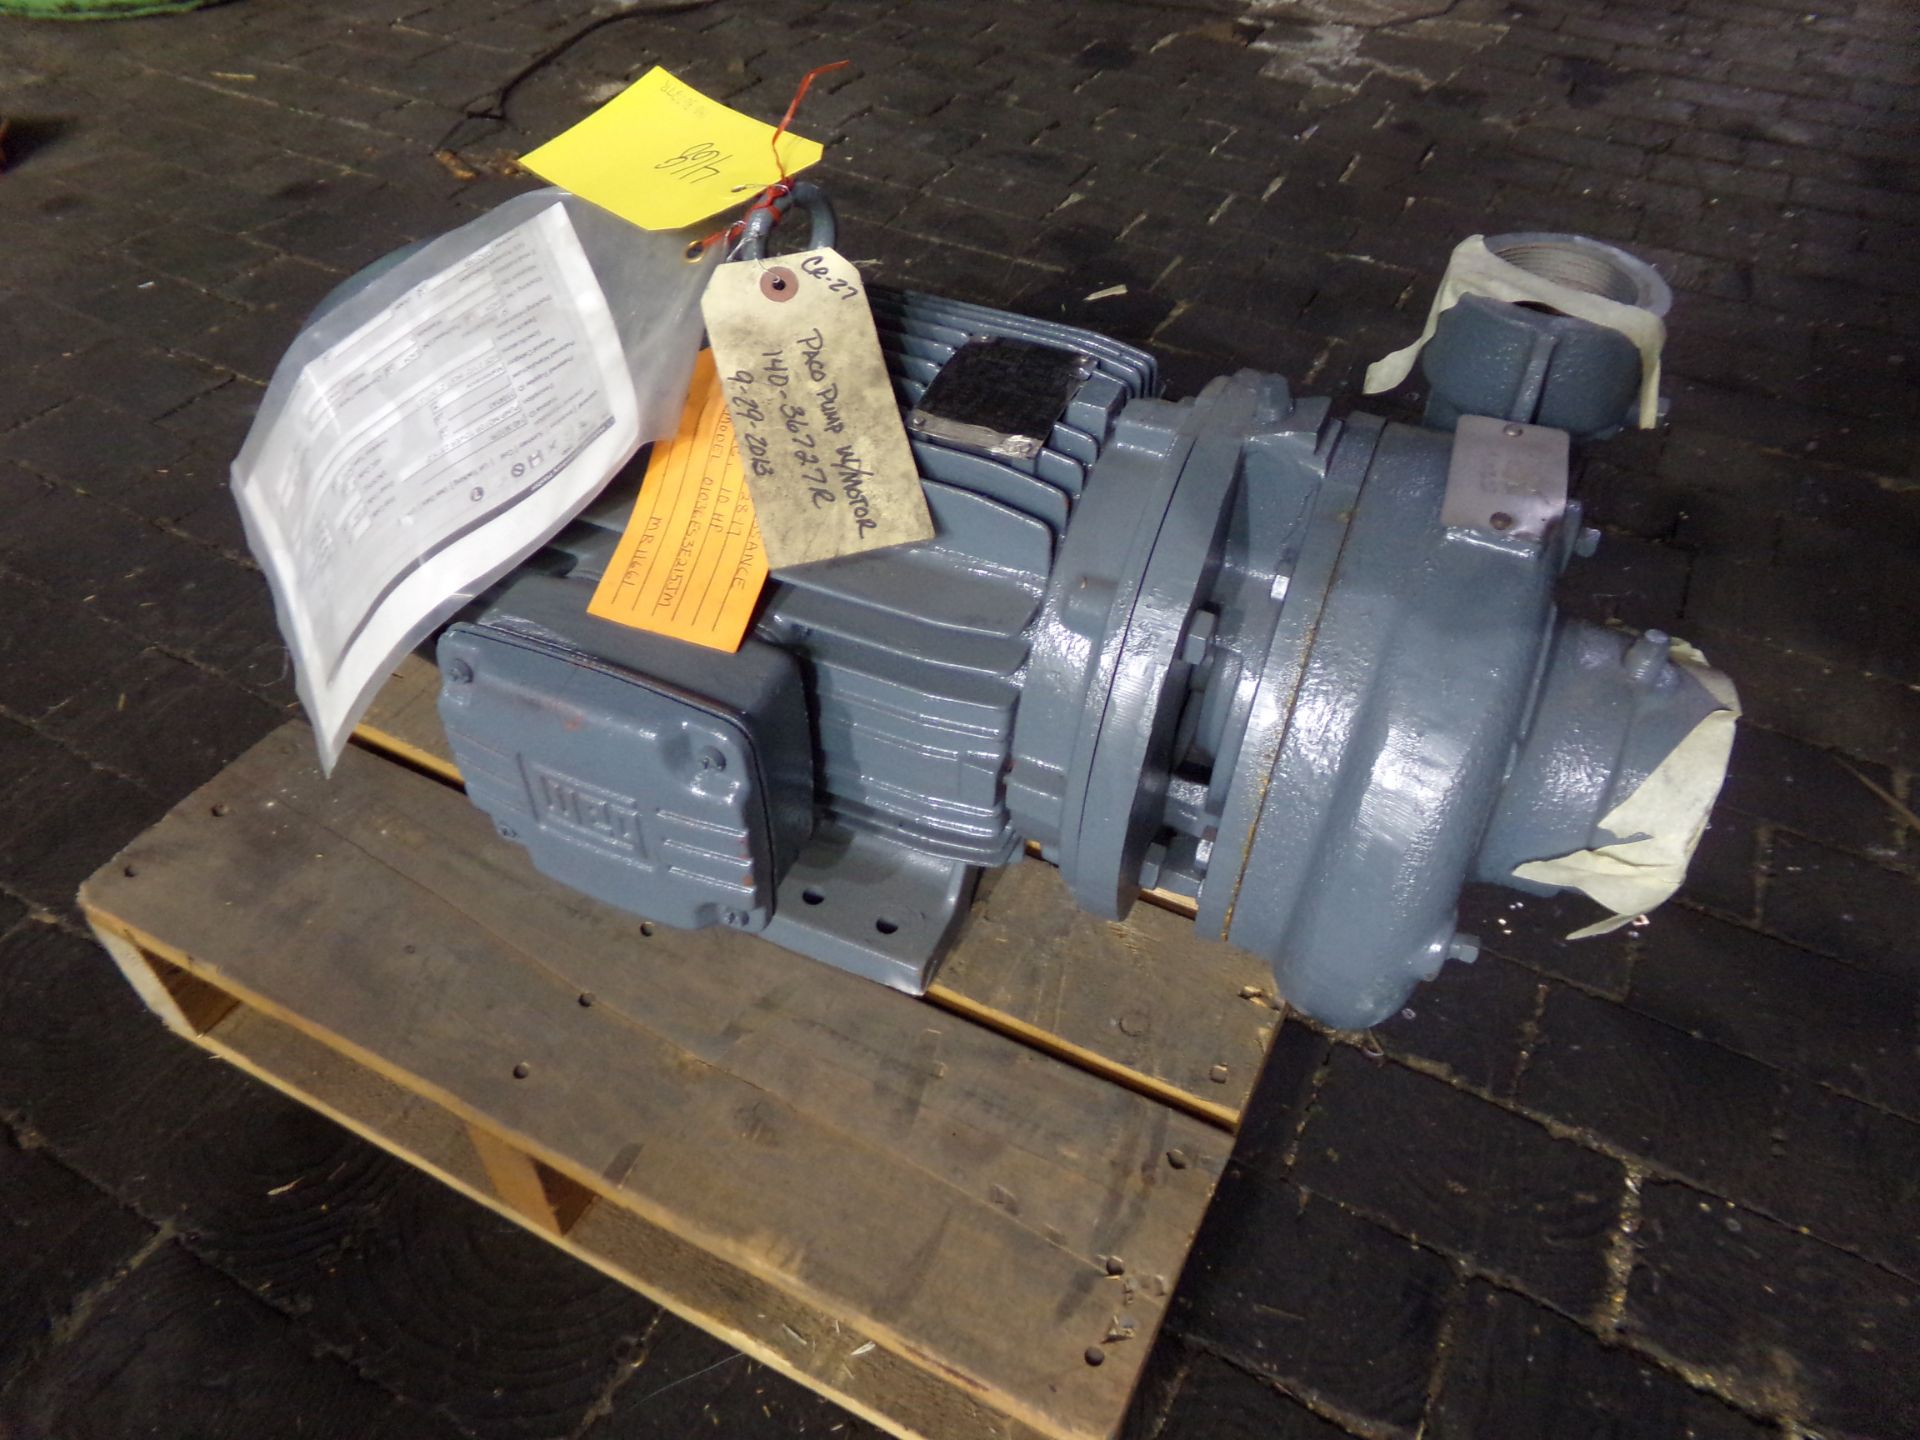 WEG ELECTRIC MOTOR 10HP 60 HZ 3475 RPM W213/5JM FRAME WITH PACO PUMP ATTACHED - Image 5 of 9